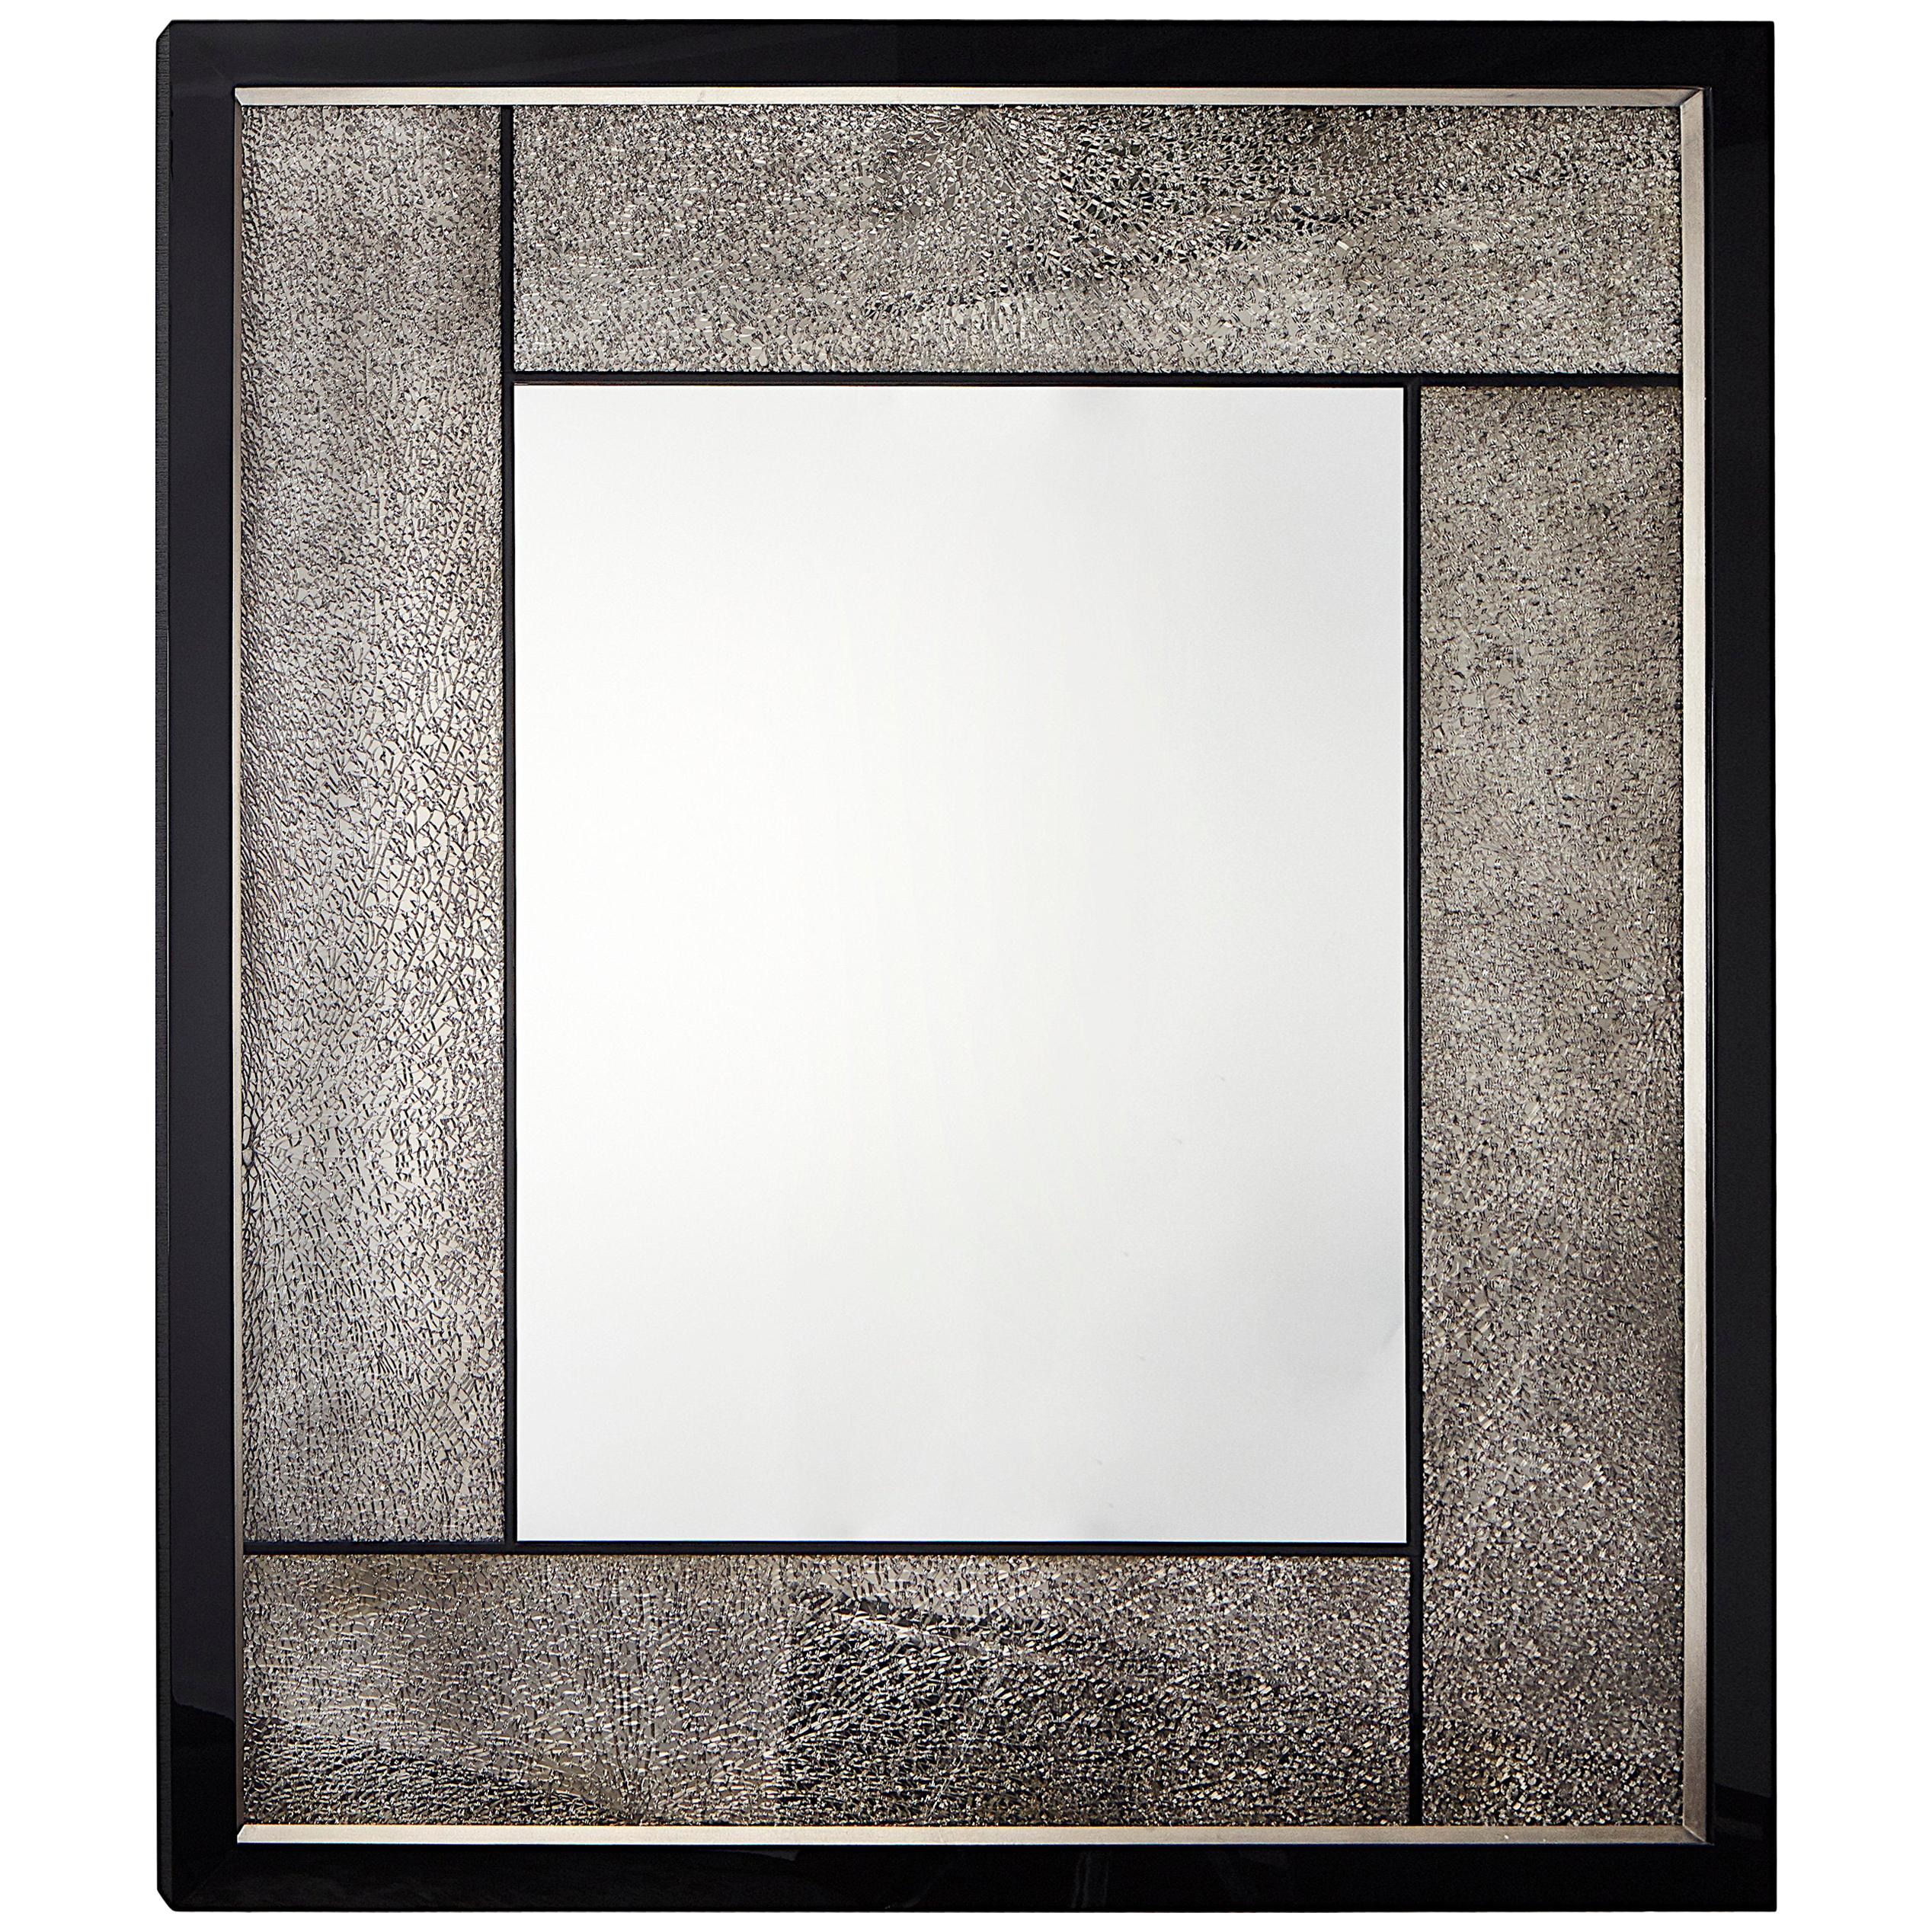 Big Mirror with Cracked Glass and Piano Black/Silver Leaf Frame, Customizable For Sale